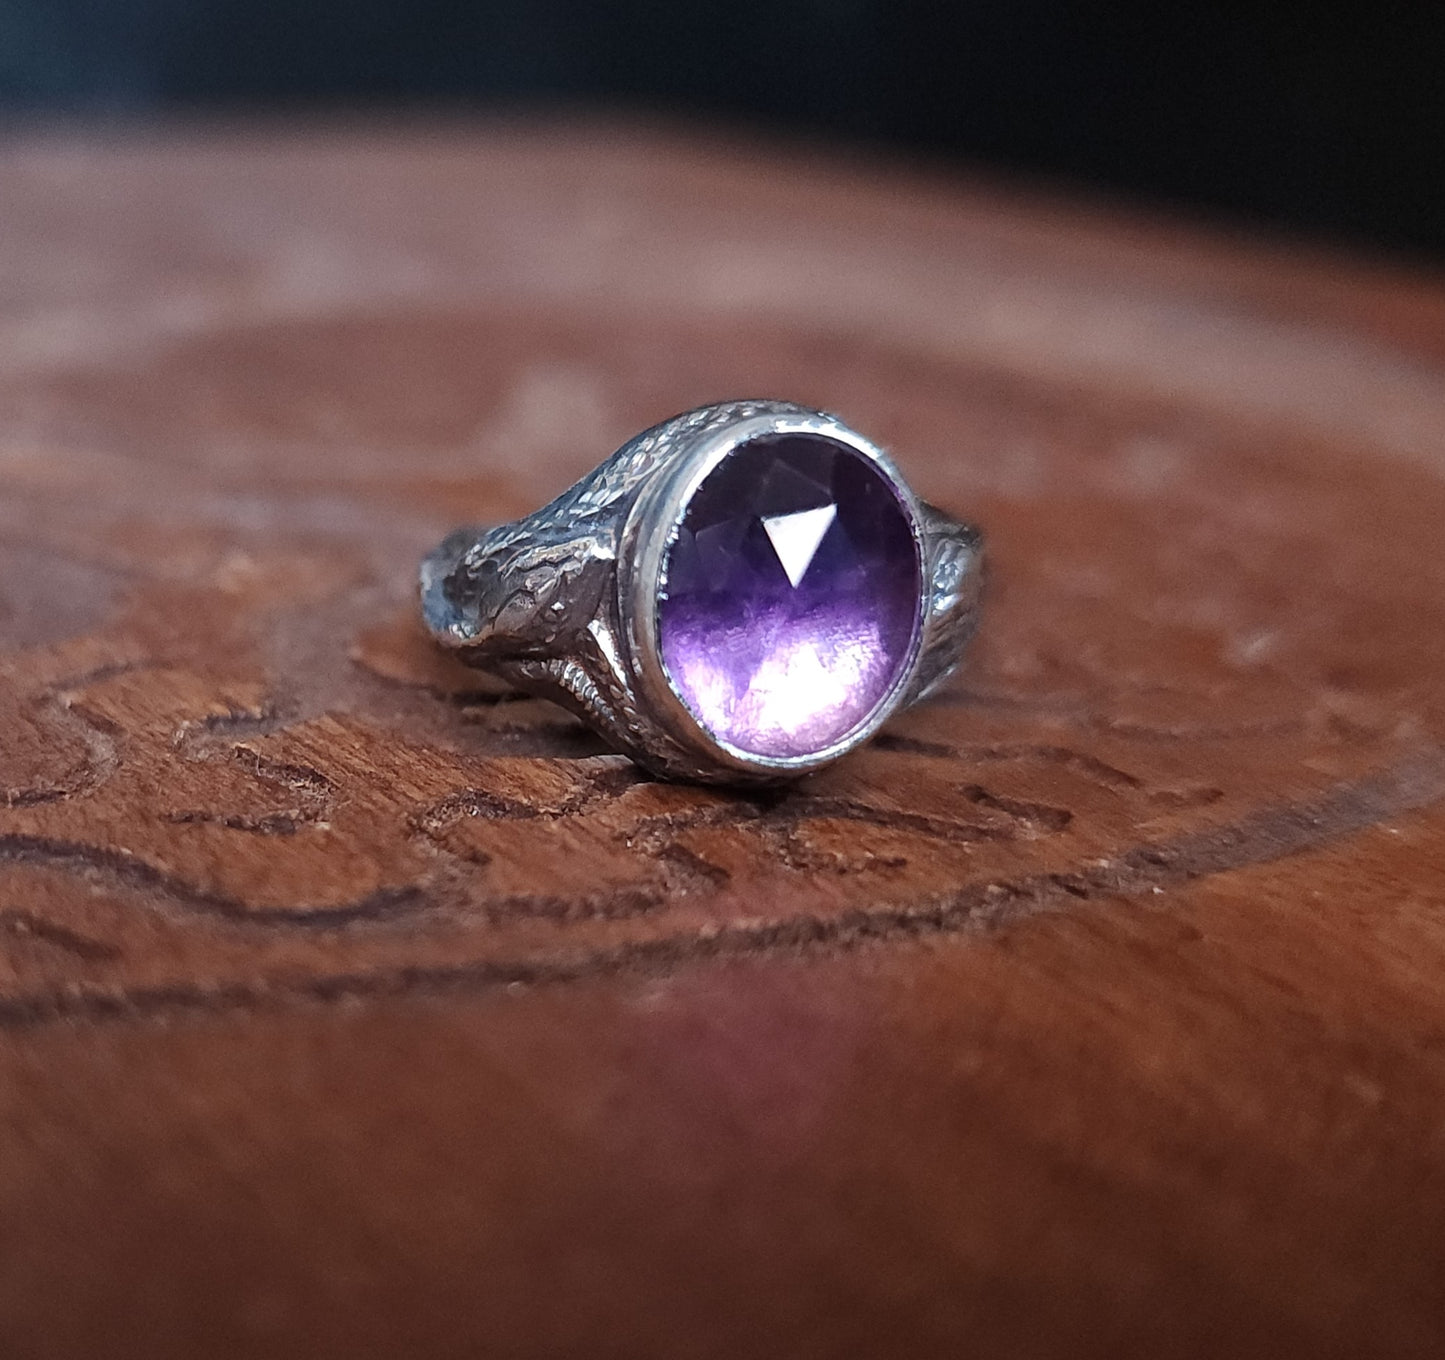 "Serpentine" - Handcrafted Amethyst Sterling Silver Ring